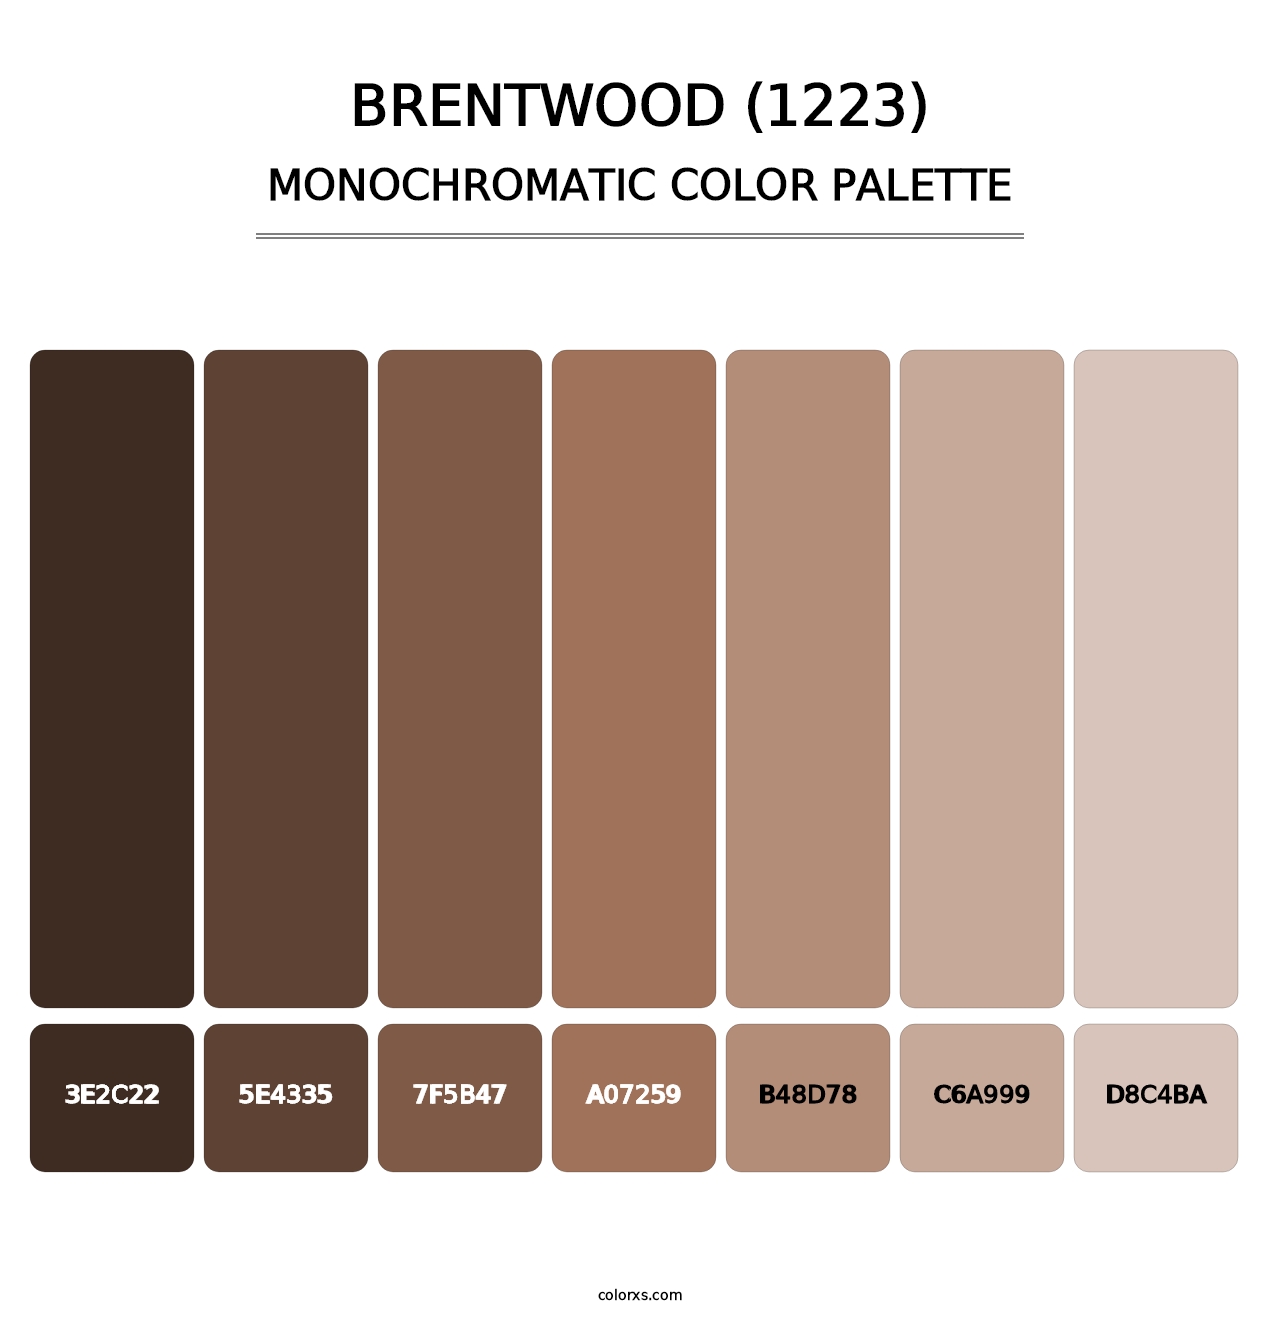 Brentwood (1223) - Monochromatic Color Palette